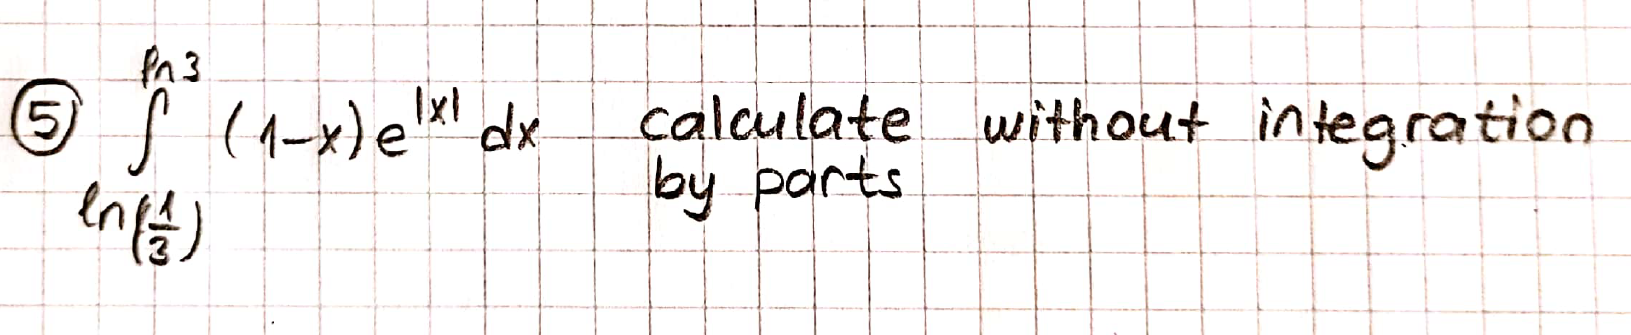 calculate without integration
by parts
